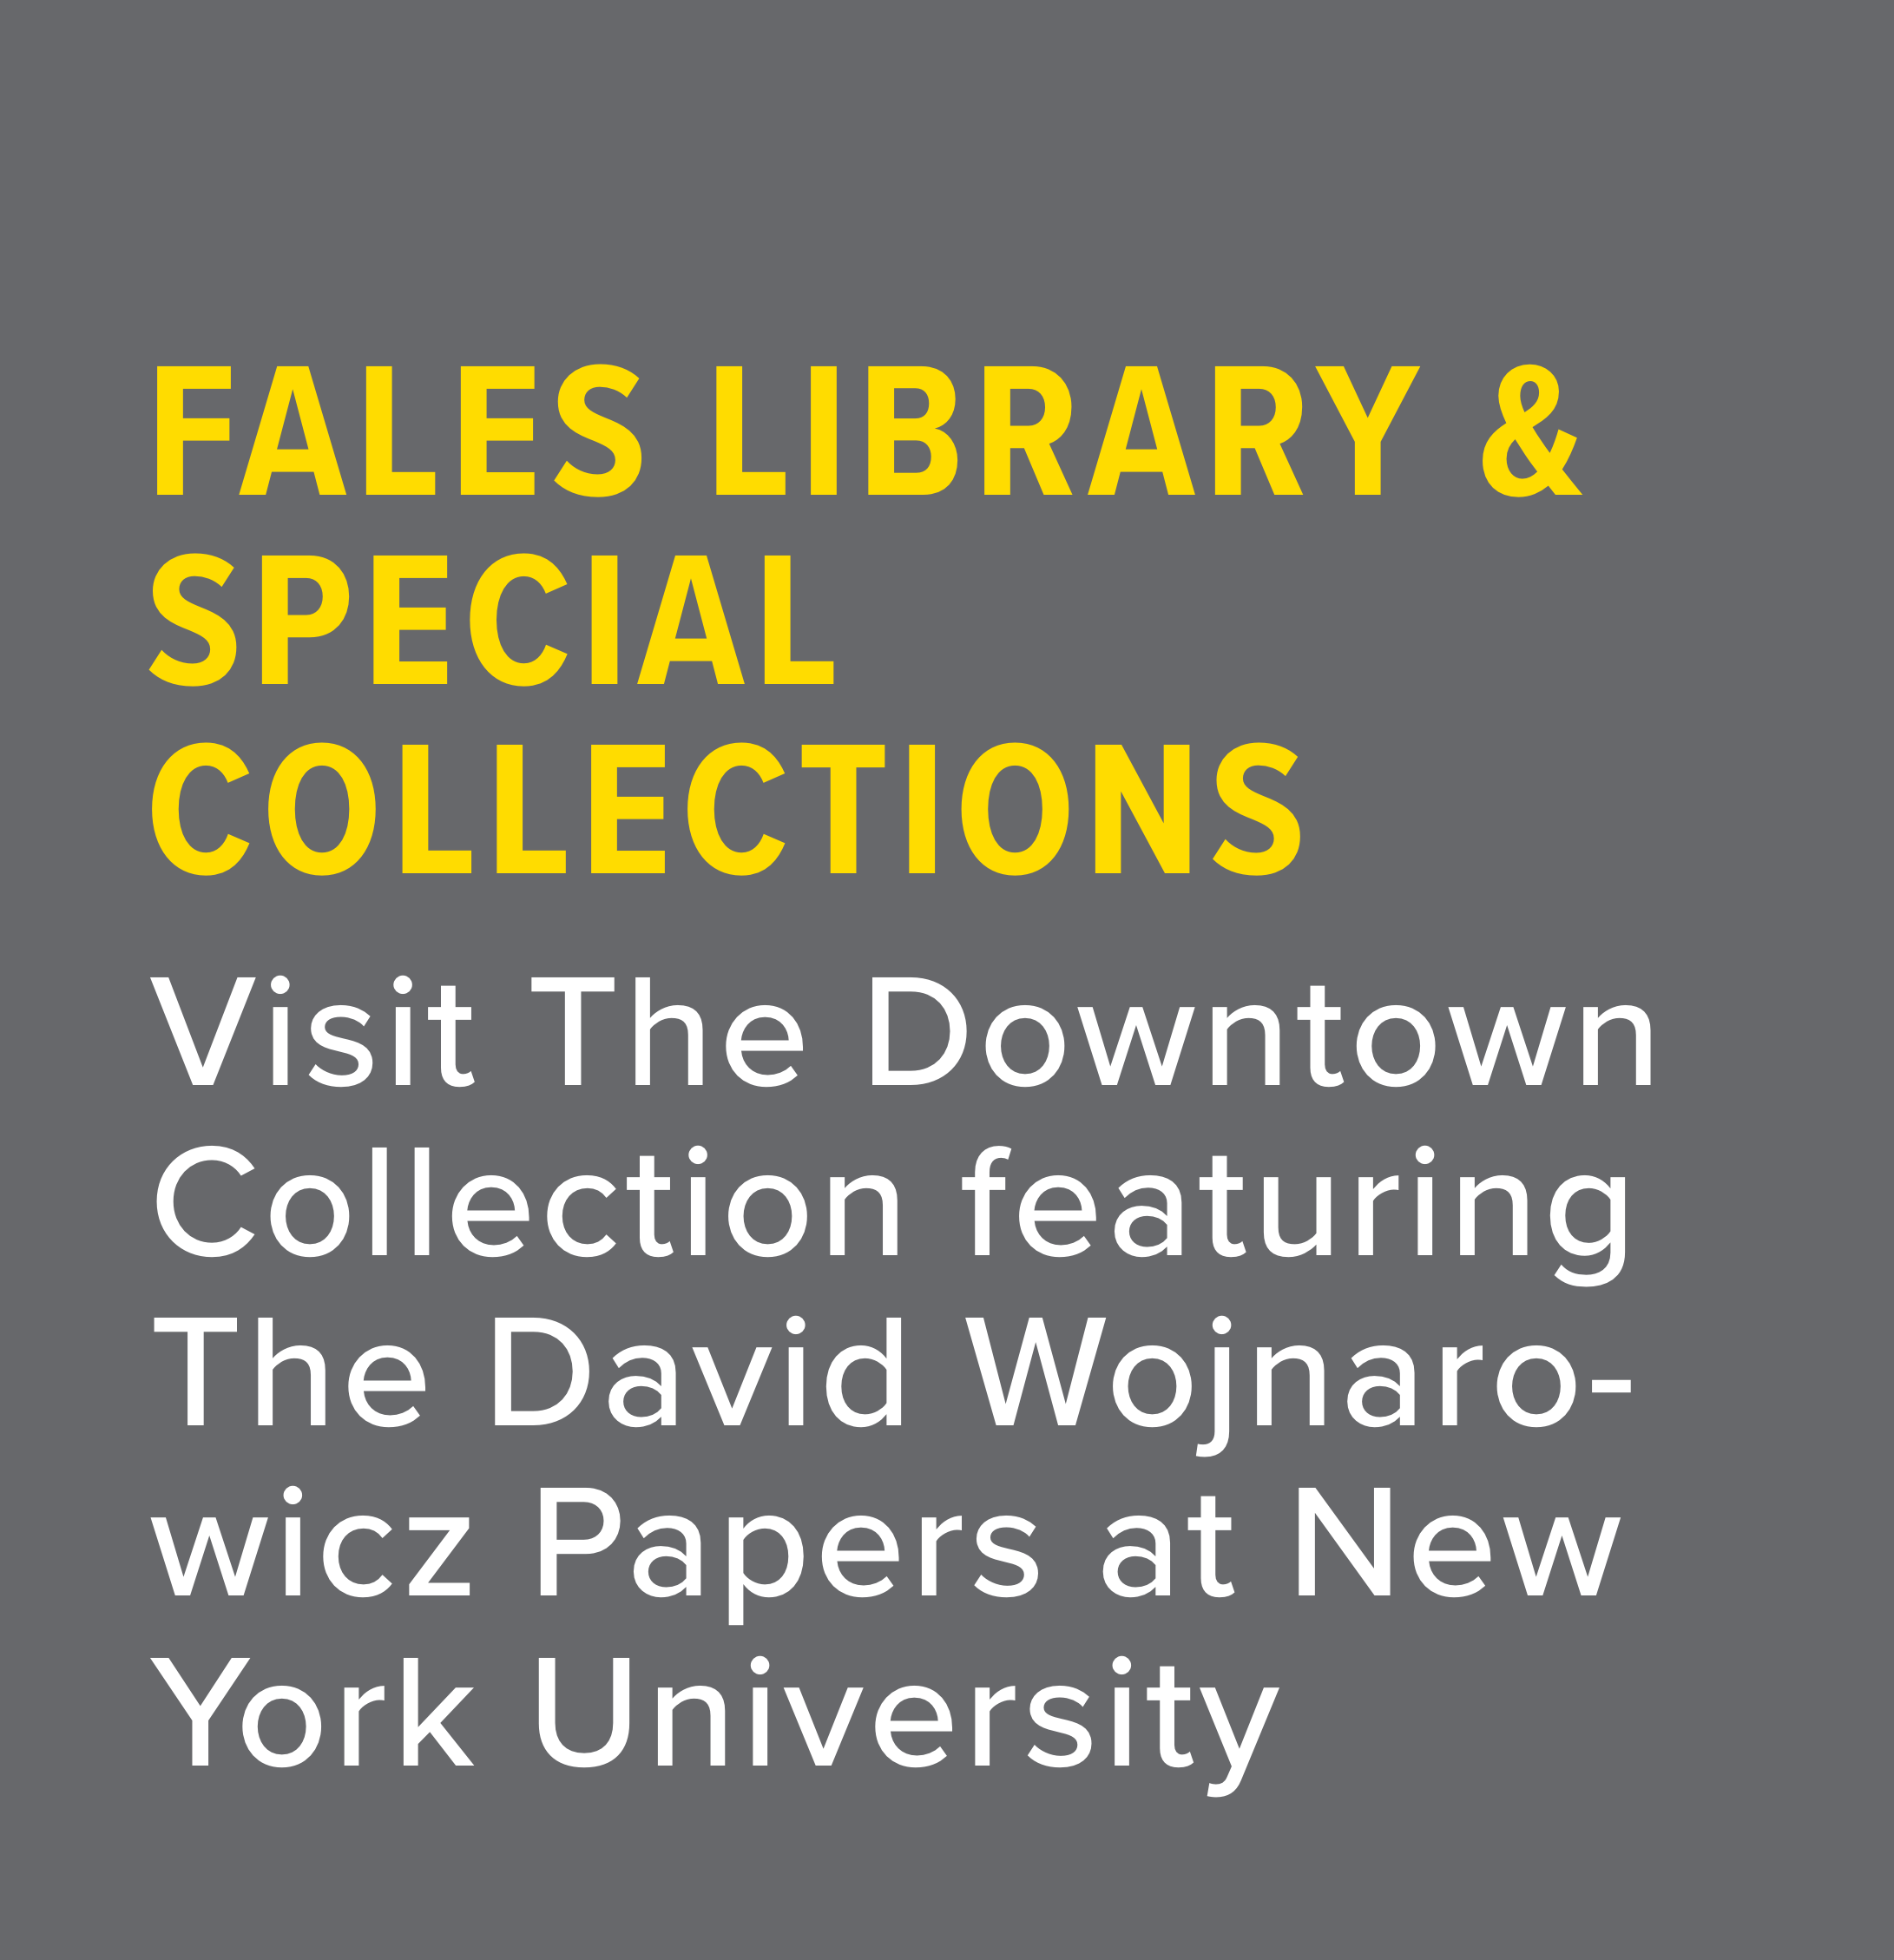 Visit The Downtown Collection featuring The David Wojnaro- wicz Papers at New York University